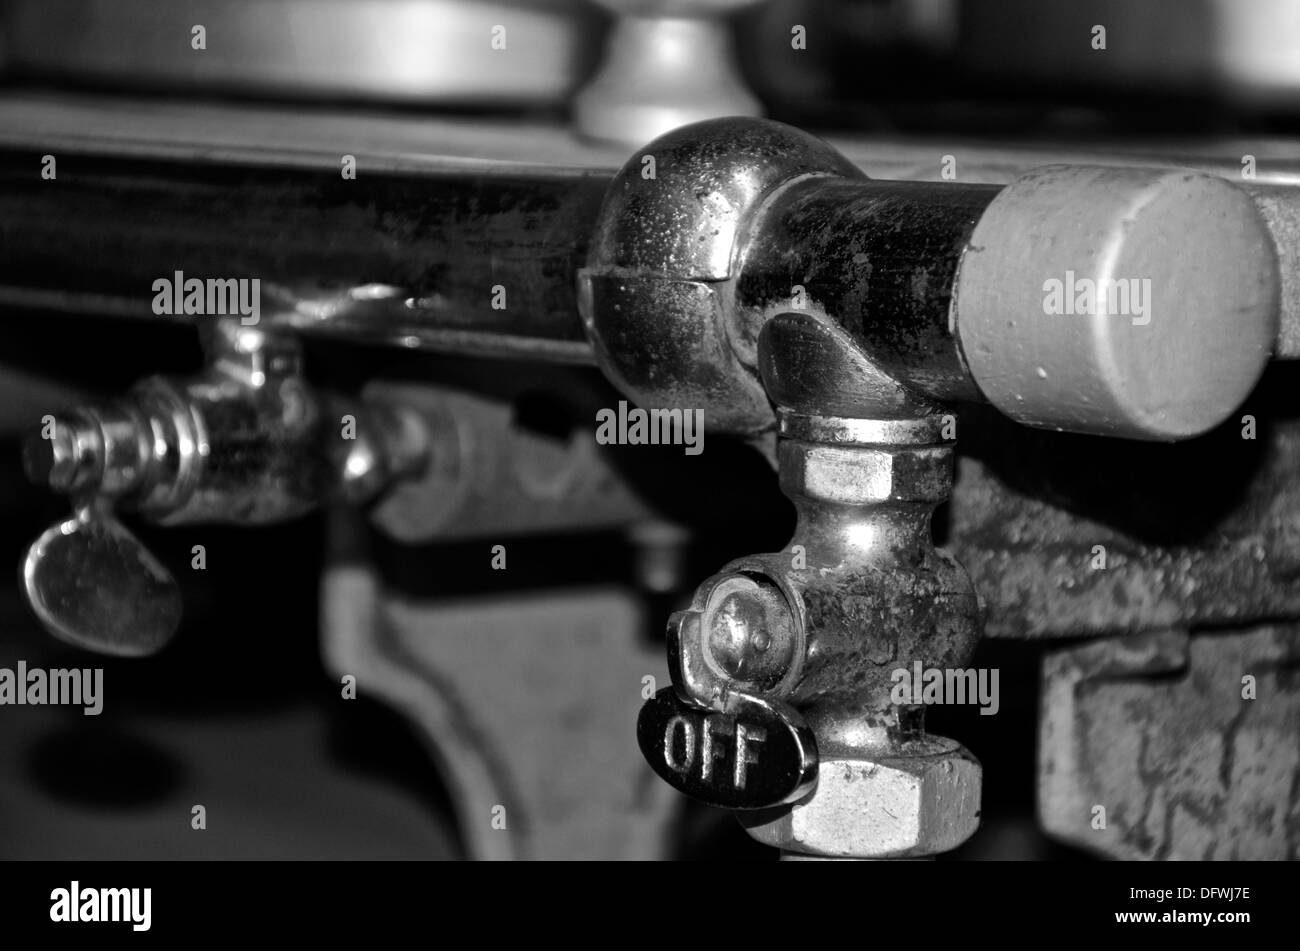 The 'OFF' switch of a 1940's industrial gas cooker in monochrome. Stock Photo